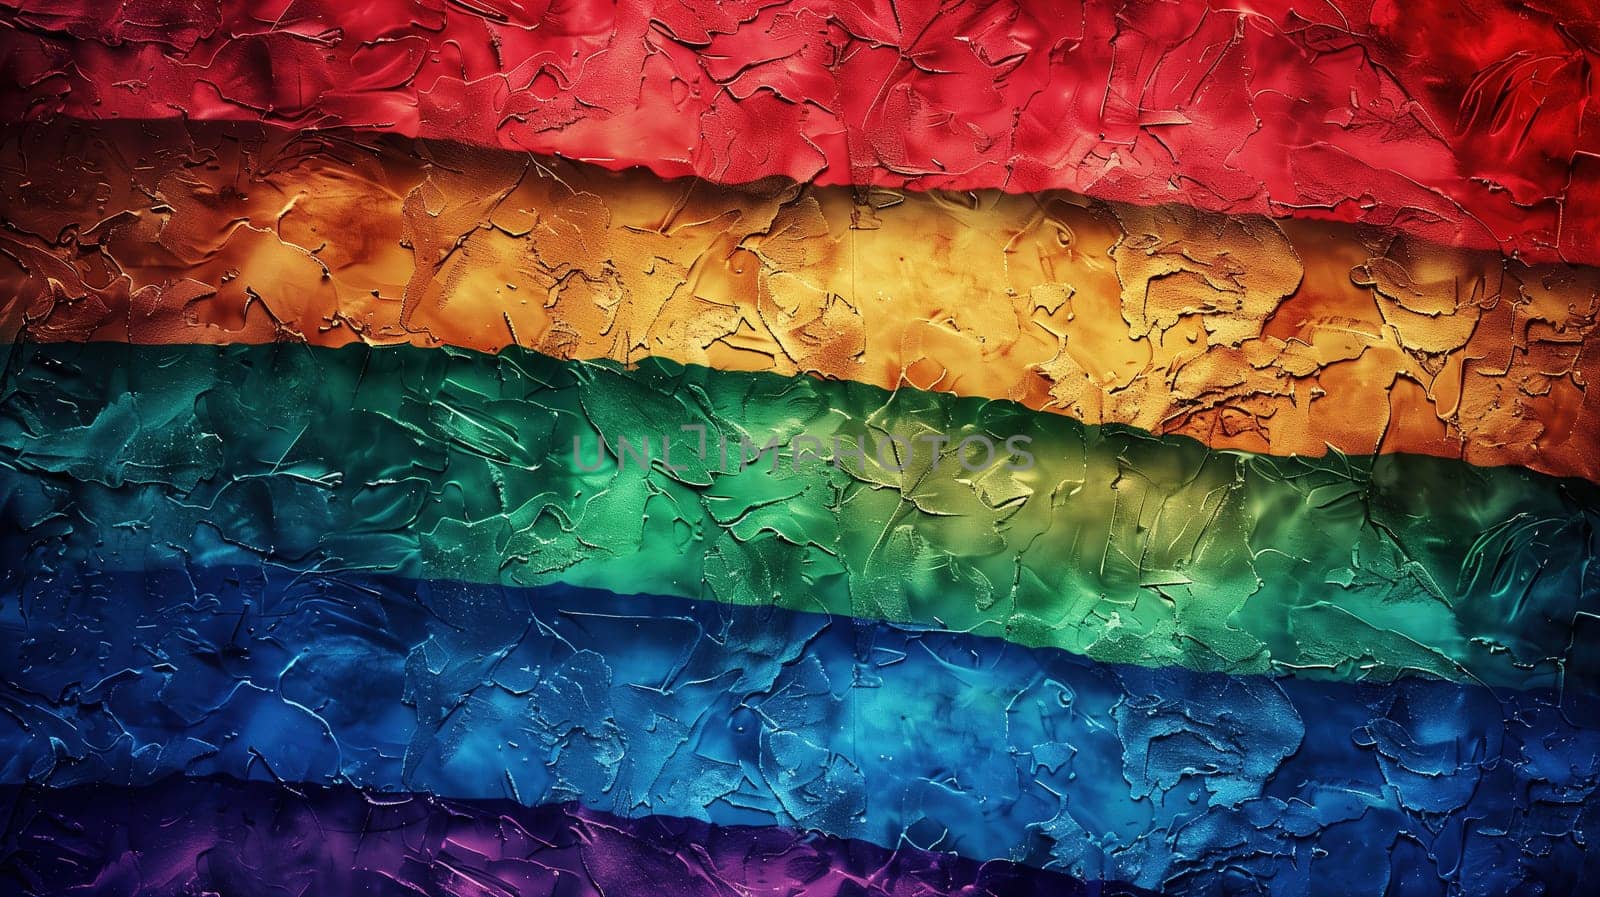 Vibrant LGBT Pride Flag Colors Representing Inclusivity and Diversity by TRMK